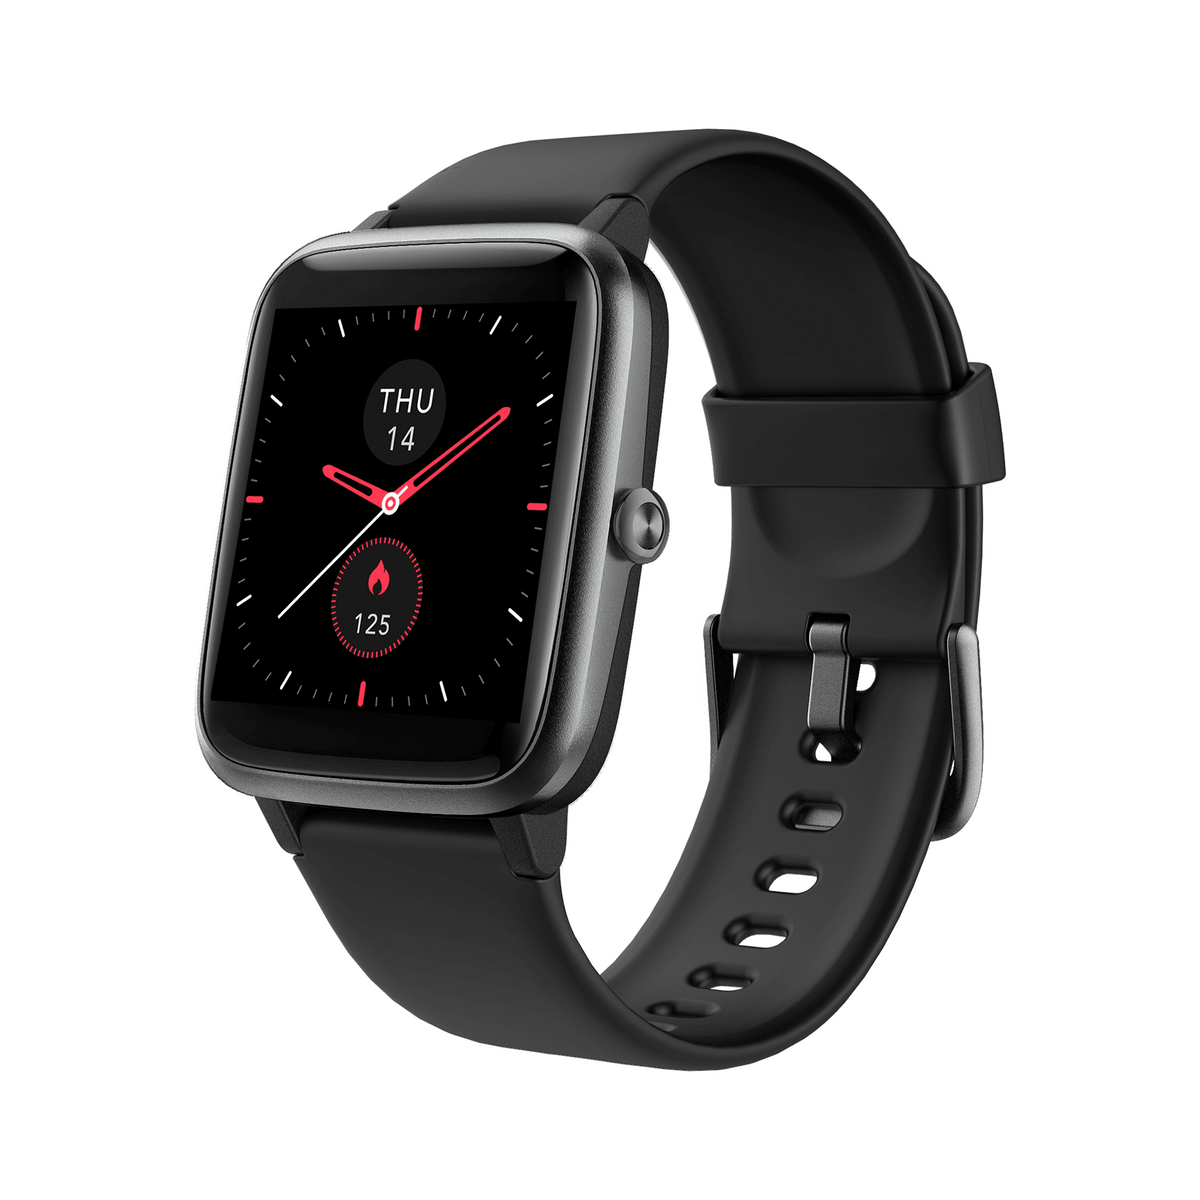 iConnect by Timex Black Smart Watch TW5M49700 - Wallace Bishop